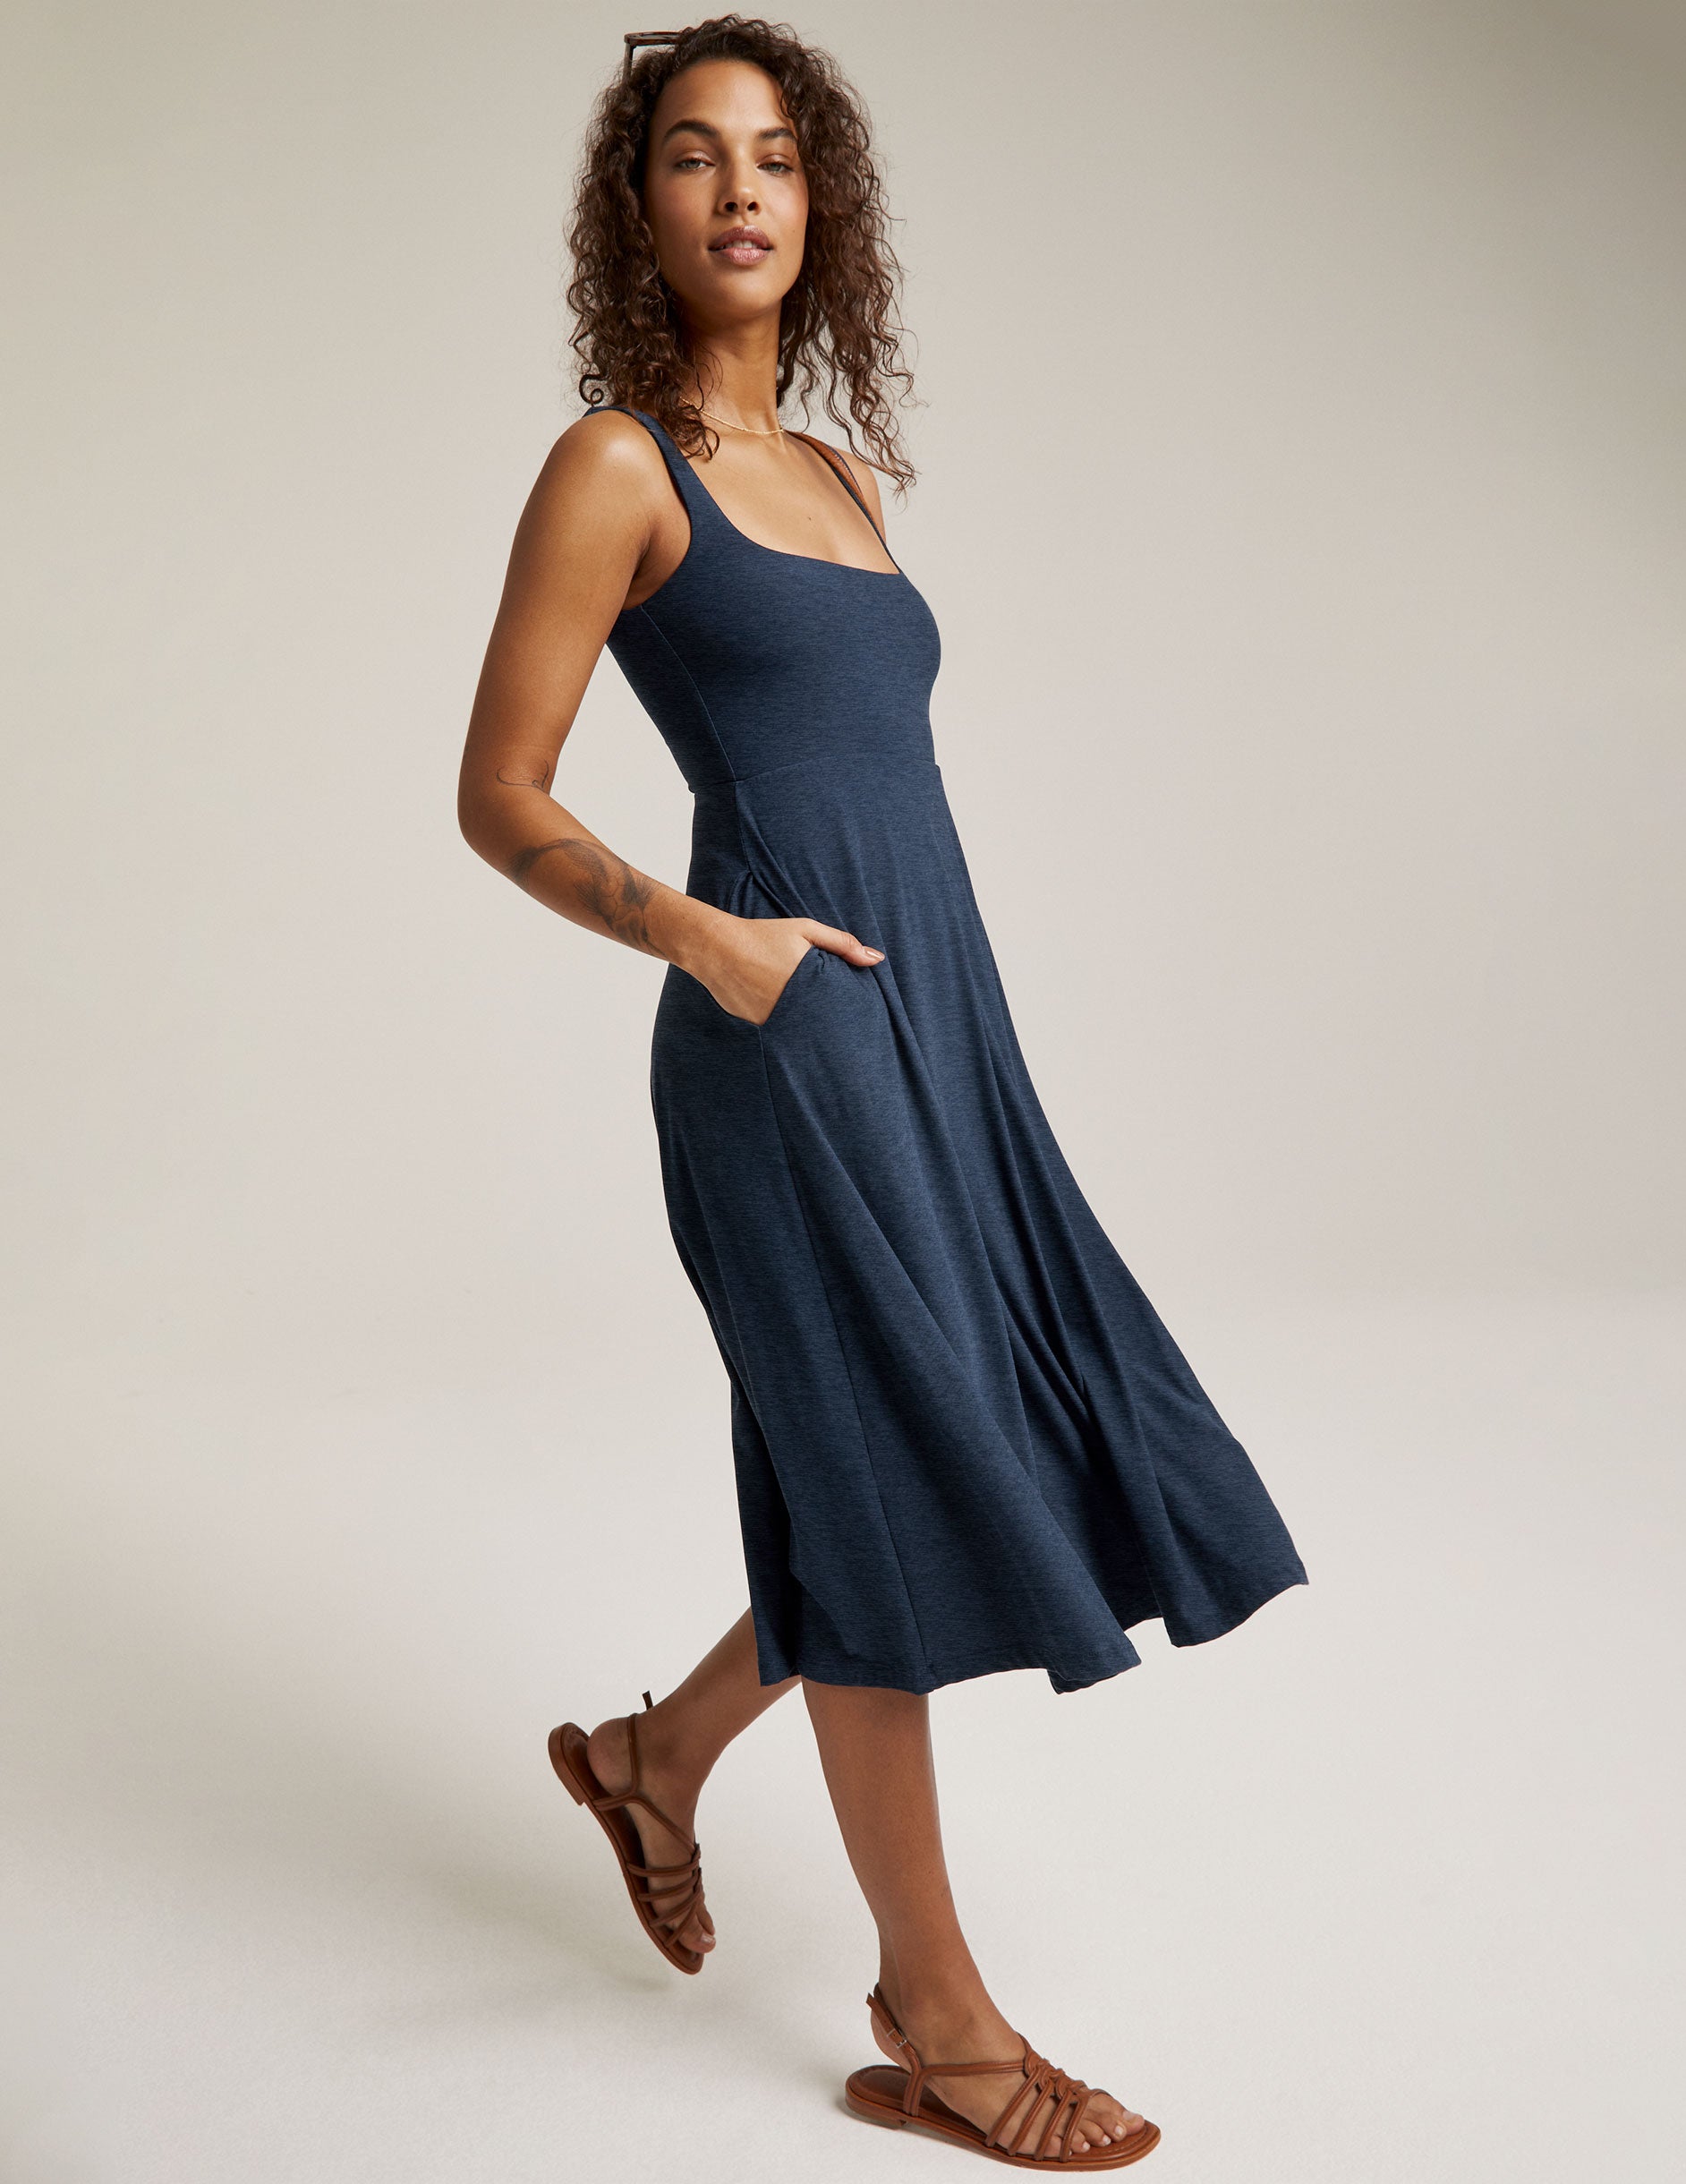 blue sleeveless midi loose fitting dress with square neckline and pockets